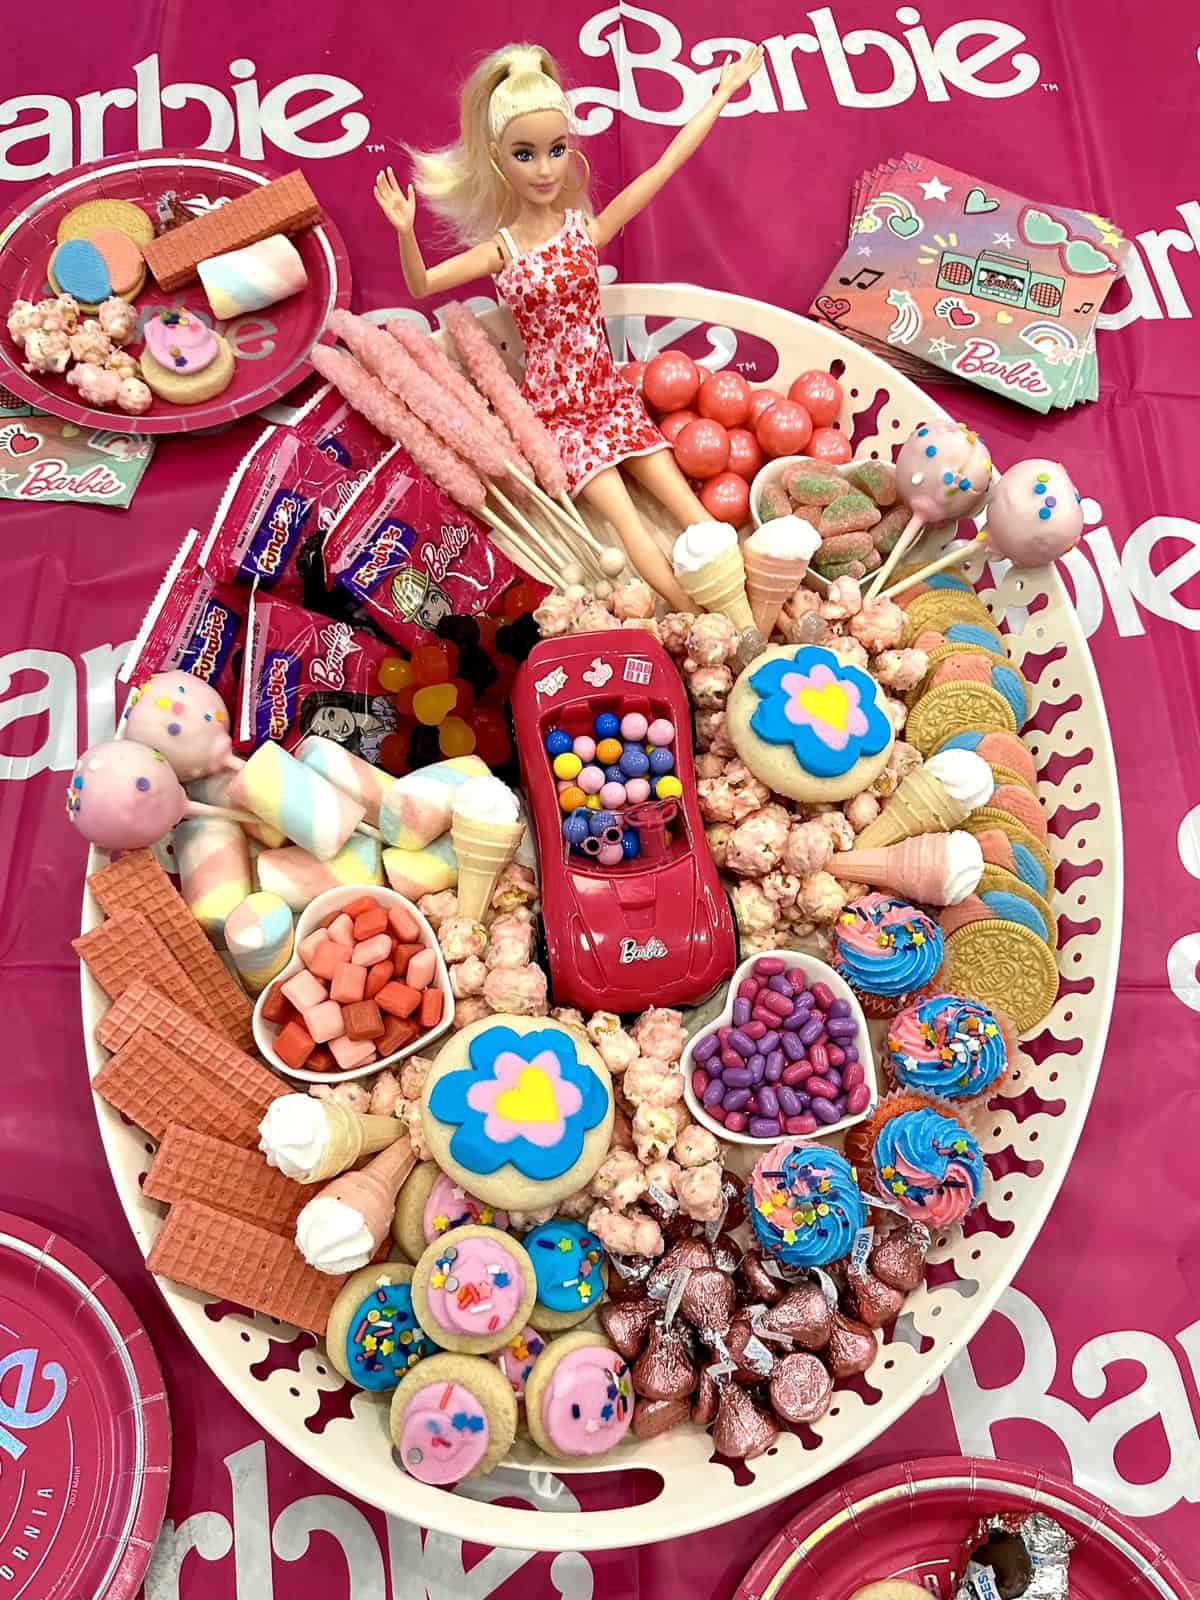 A Barbie dessert tray with pink cookies, popcorn, cake pops and a Barbie doll on a Barbie themed table cloth.